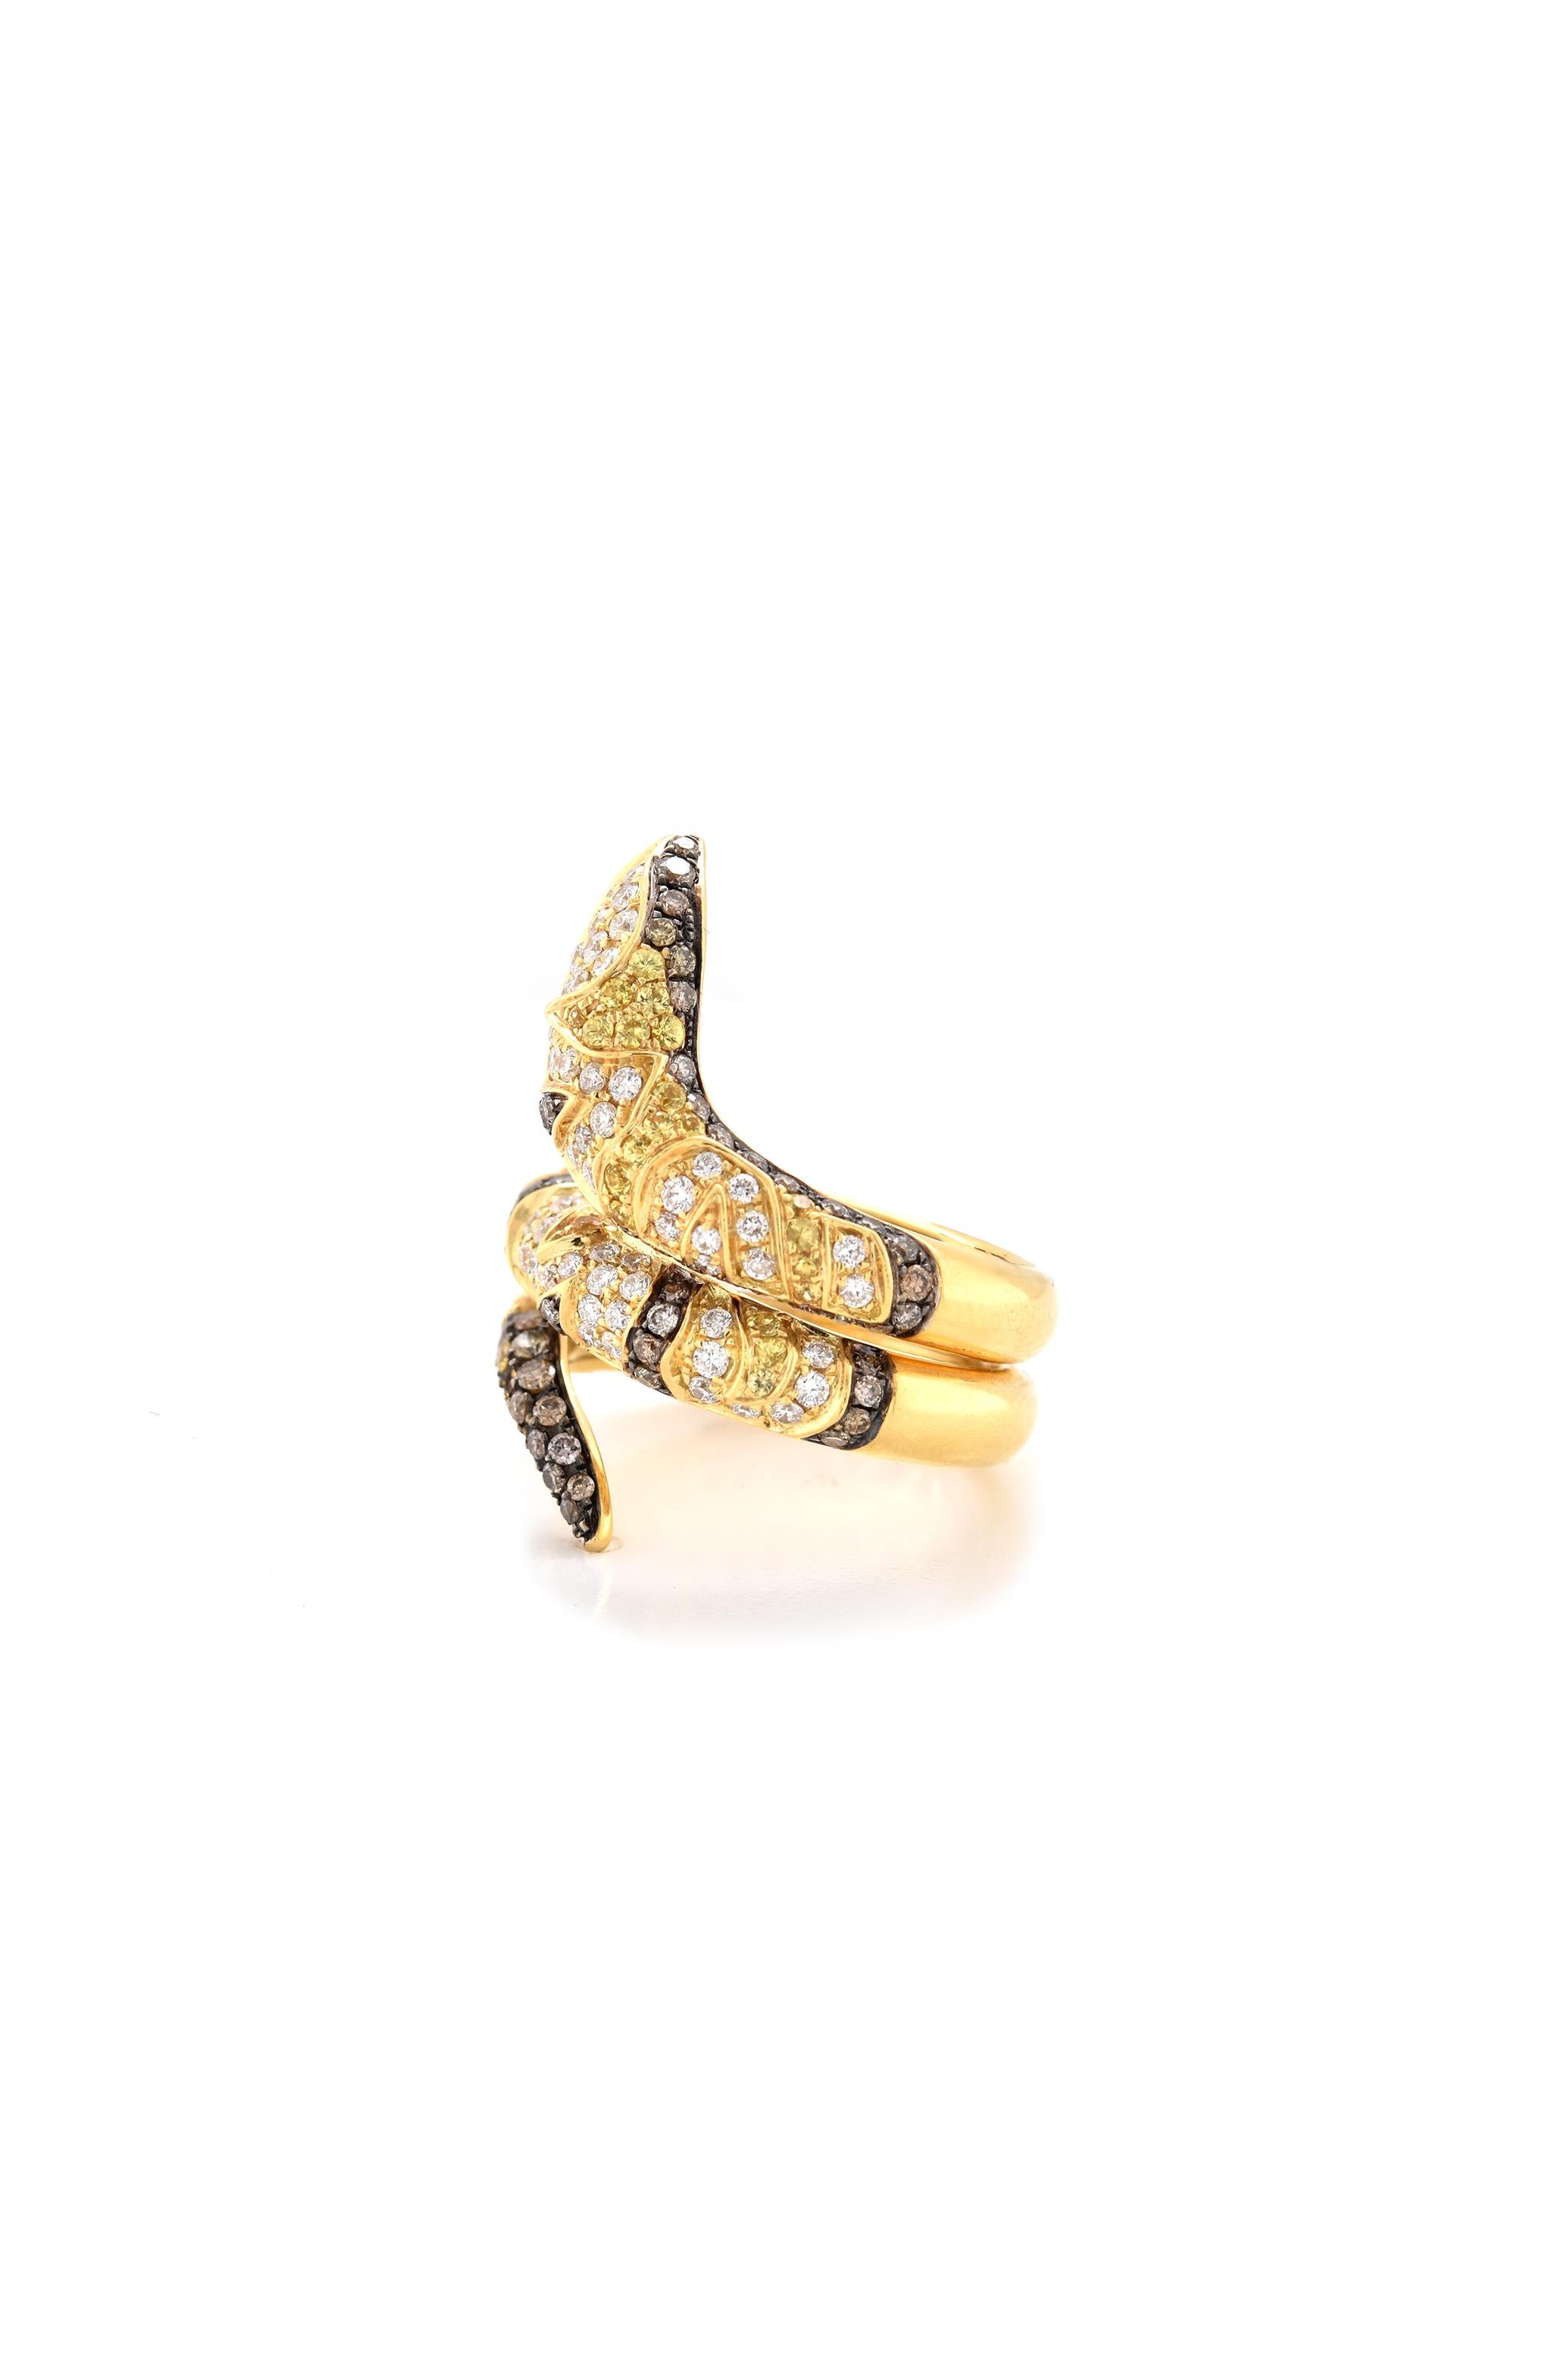 Designer: custom
Material: 18K yellow gold
Diamonds: 176 round cut = 1.96cttw
Color: G / Champagne
Clarity: SI1
Sapphire: 32 round cut = .41cttw
Color: Yellow
Ring size: 7 (please allow two additional shipping days for sizing requests)
Weight: 